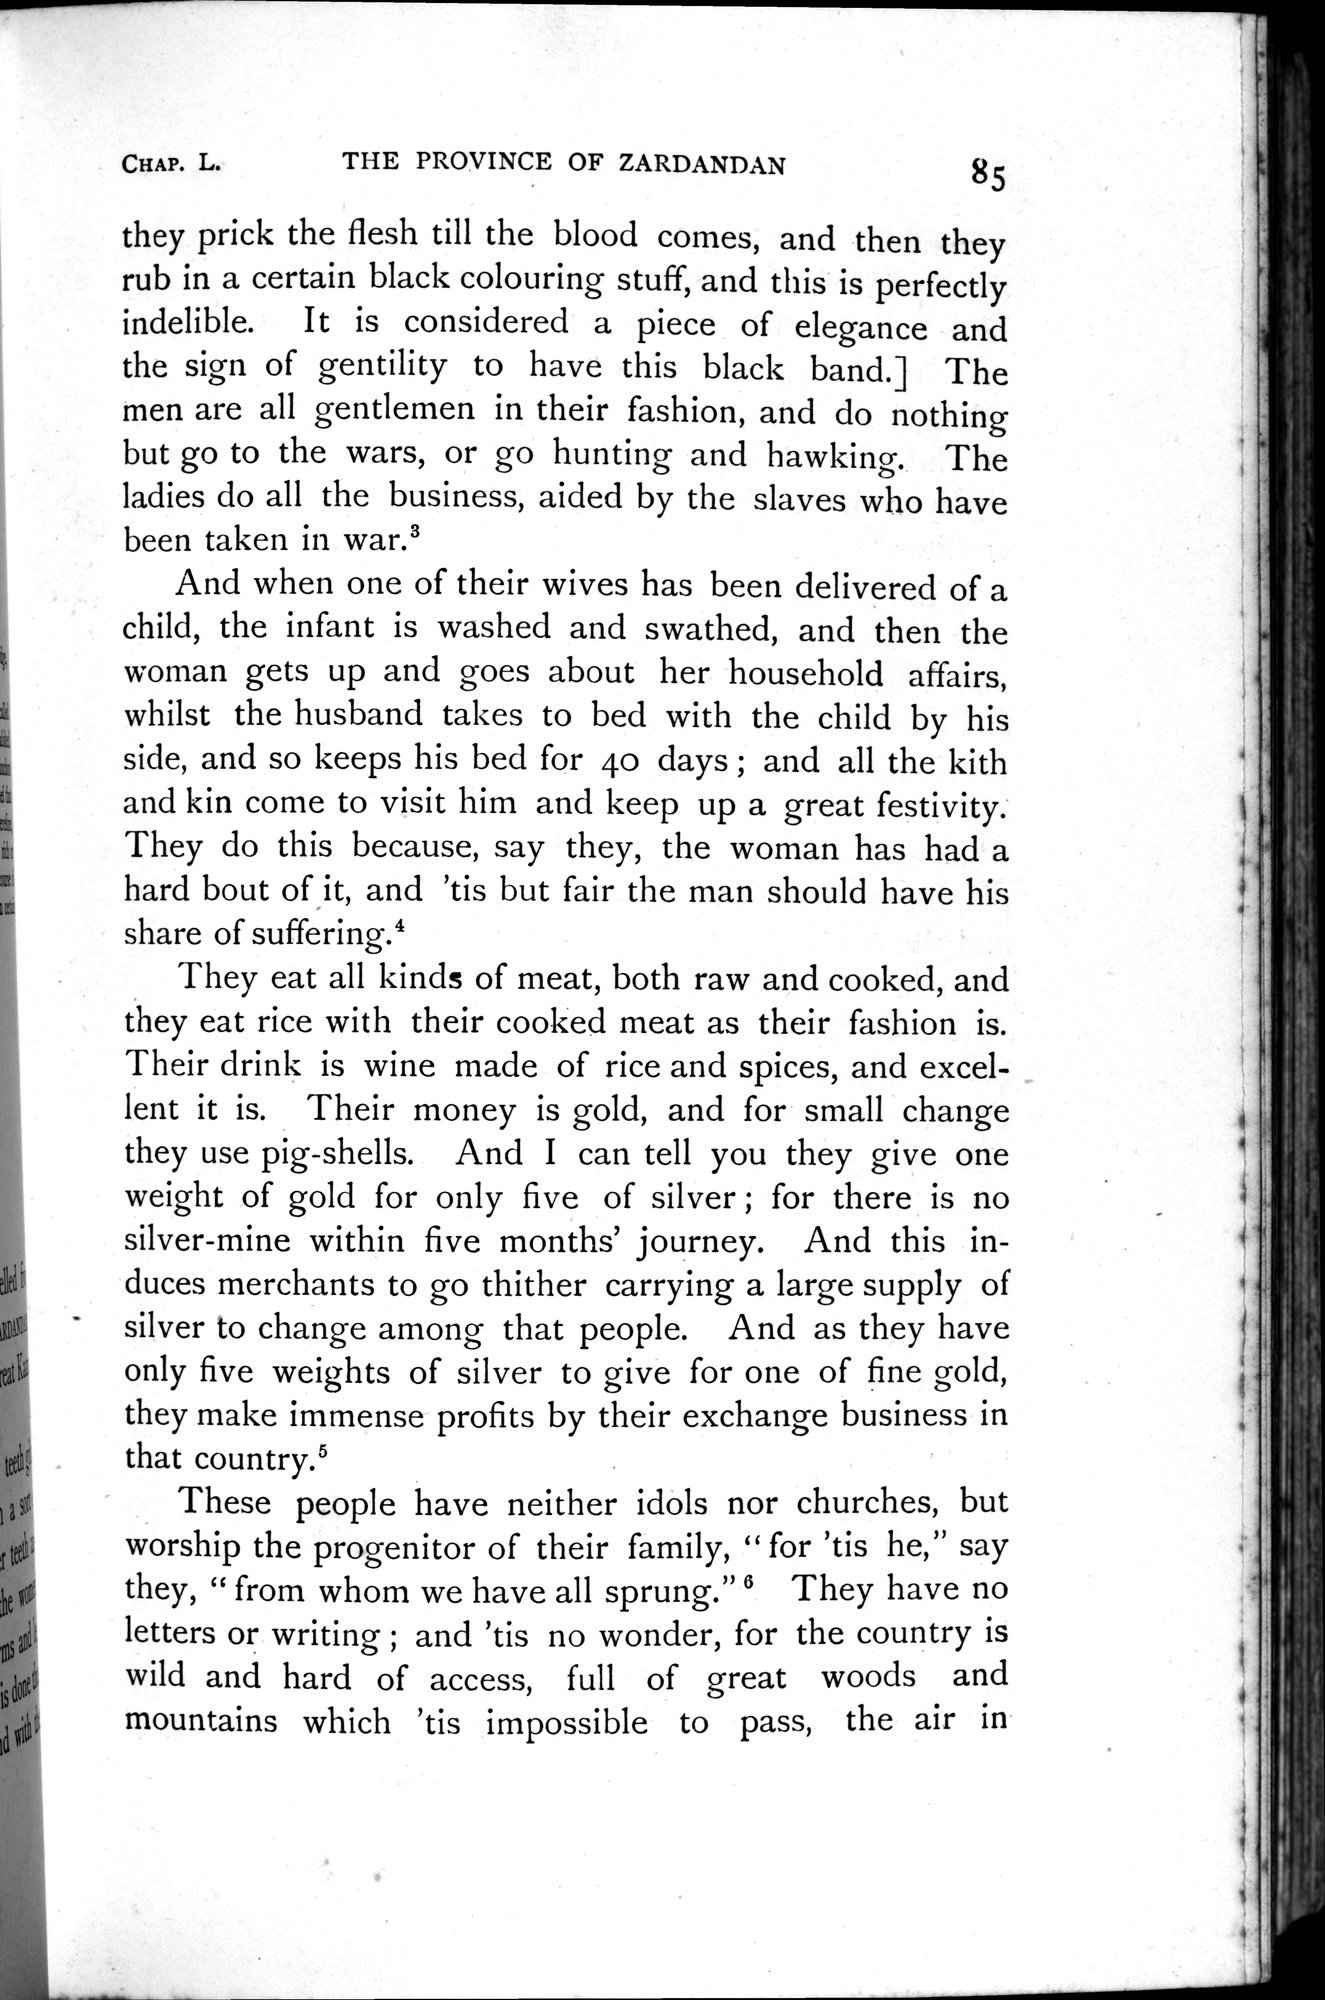 The Book of Ser Marco Polo : vol.2 / Page 123 (Grayscale High Resolution Image)